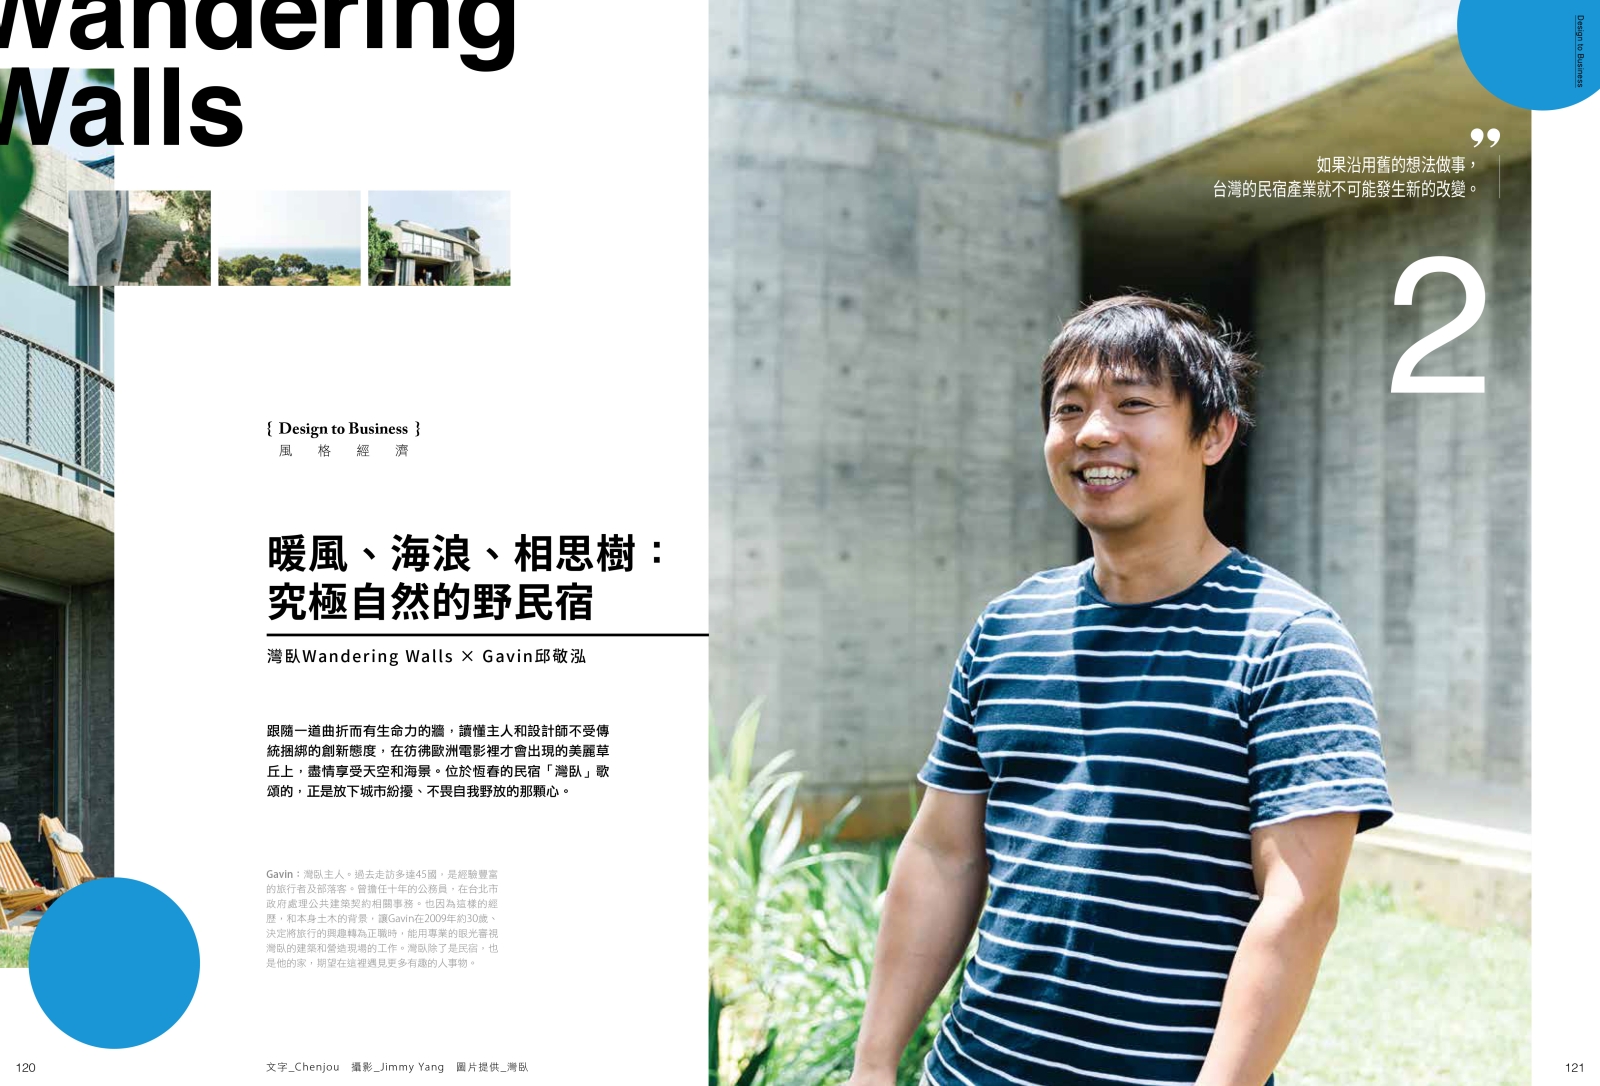 Shopping Design magazine reported the Wandering Walls